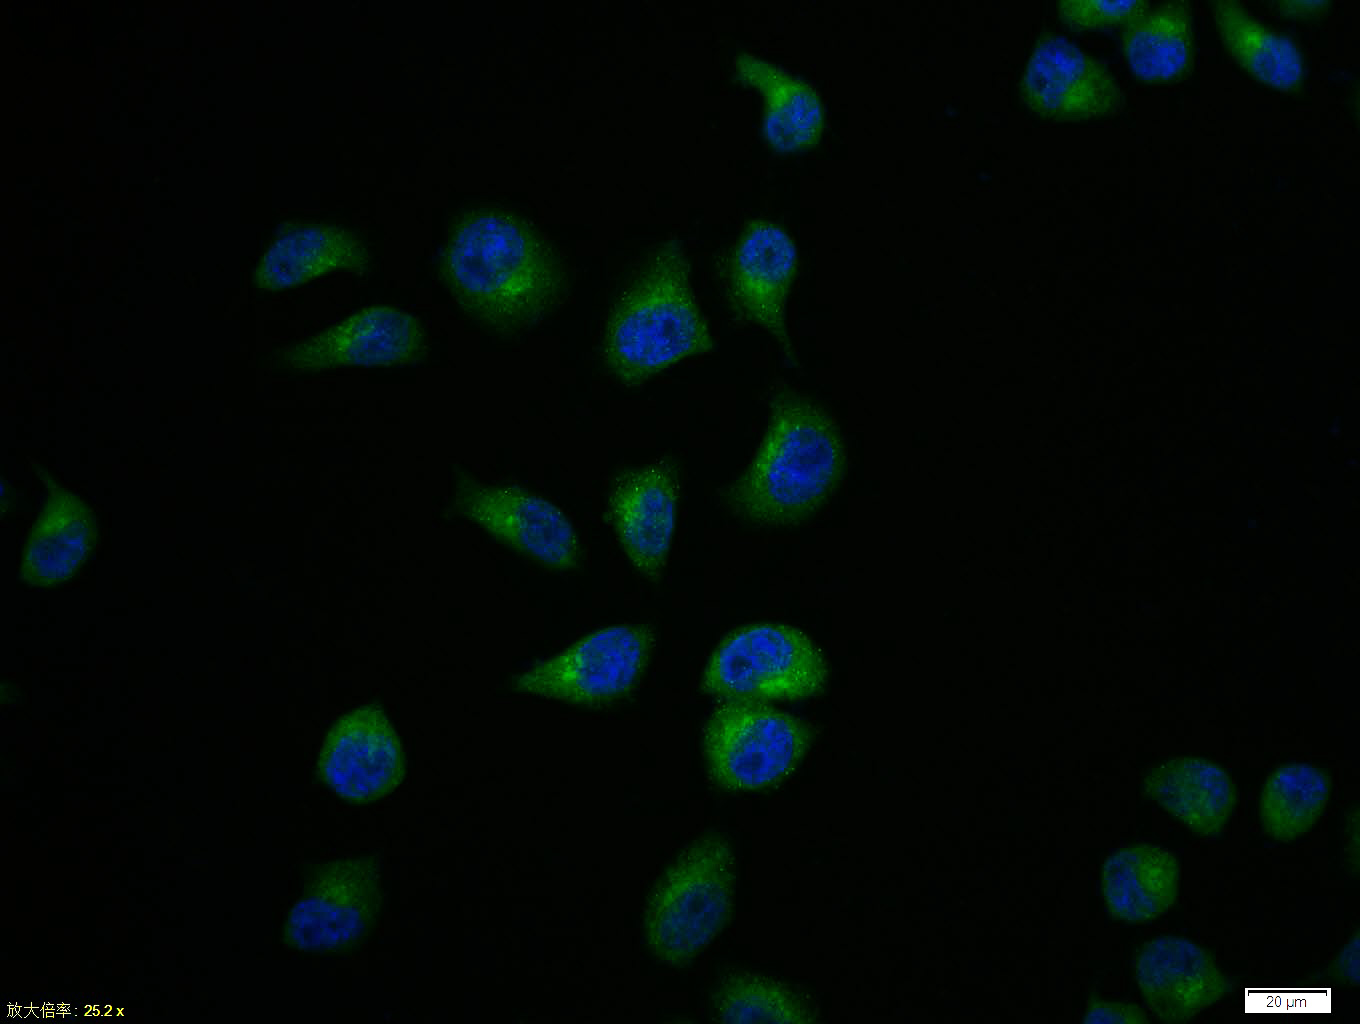 Hela cell; 4% Paraformaldehyde-fixed; Triton X-100 at room temperature for 20 min; Blocking buffer (normal goat serum, C-0005) at 37\u00b0C for 20 min; Antibody incubation with (IRAK1) polyclonal Antibody, Unconjugated (bs-6464R) 1:100, 90 minutes at 37\u00b0C; followed by a conjugated Goat Anti-Rabbit IgG antibody at 37\u00b0C for 90 minutes, DAPI (blue, C02-04002) was used to stain the cell nuclei.